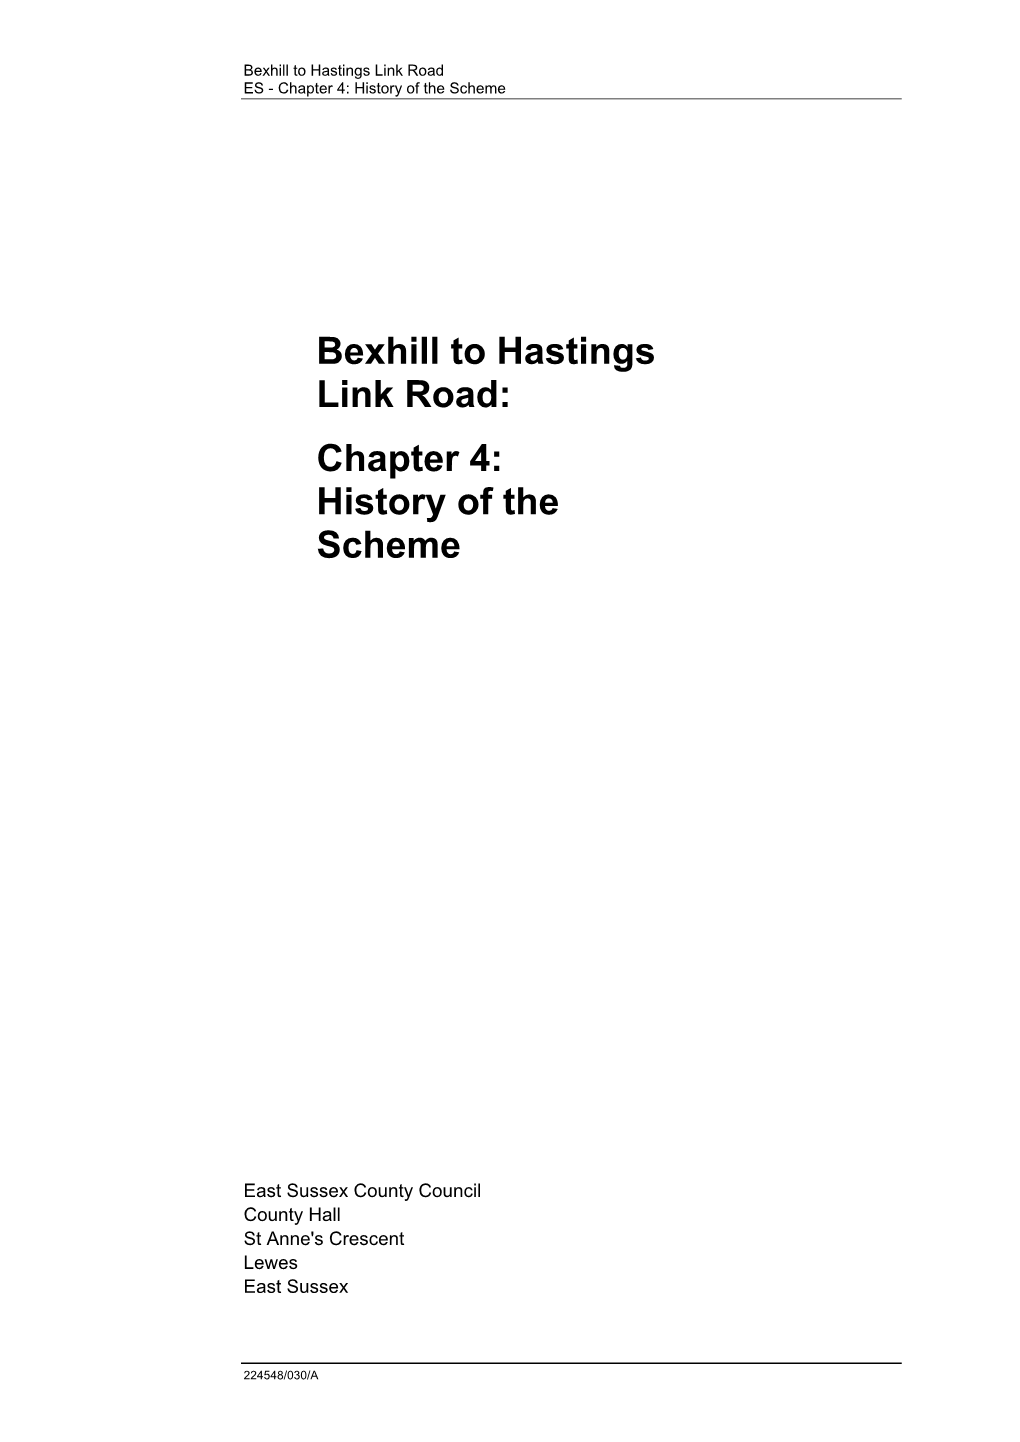 Bexhill to Hastings Link Road ES - Chapter 4: History of the Scheme